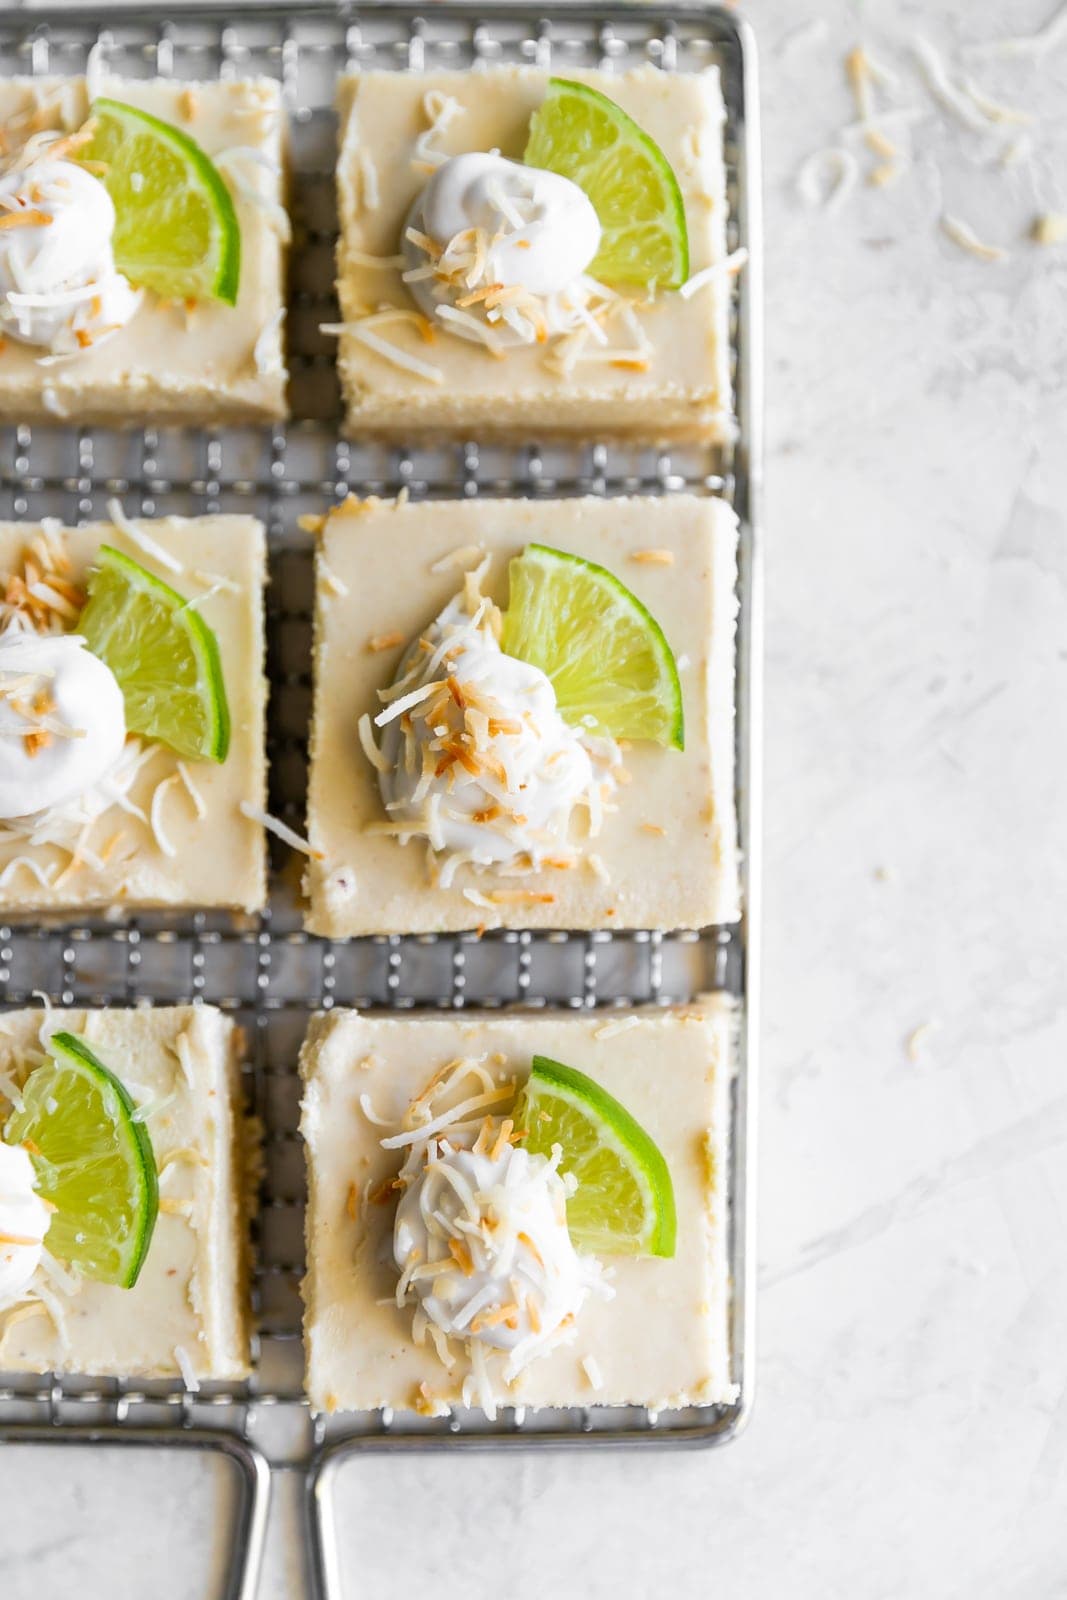 Dairy-free, grain-free, gluten-free, and refined sugar free coconut key lime pie bars made with wholesome ingredients. The perfect dessert for just about any occasion!